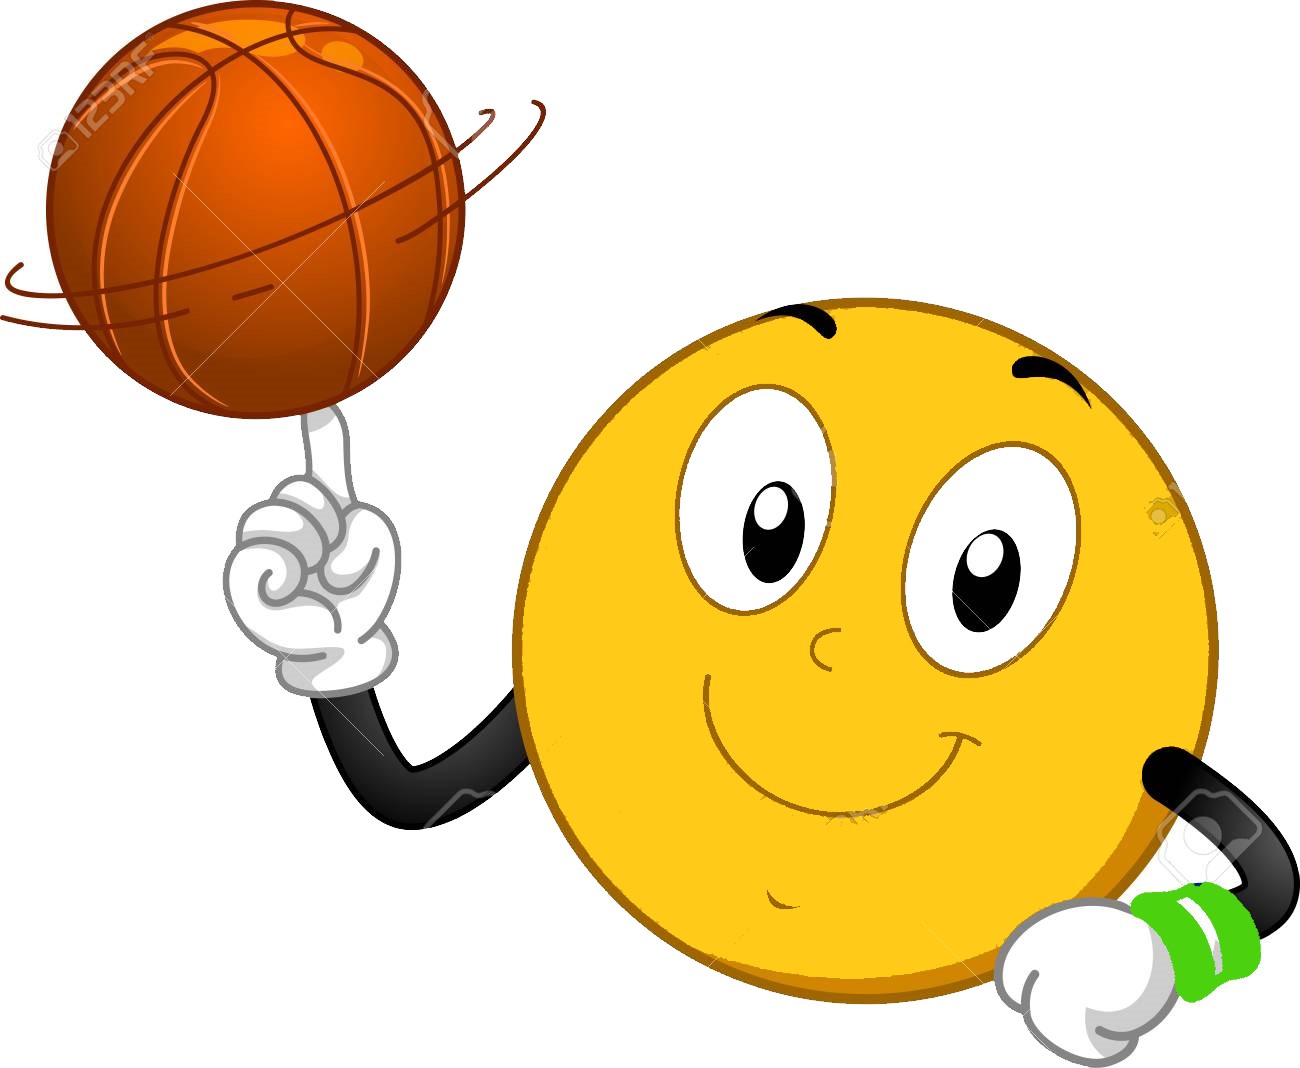 93288877-illustration-of-a-smiley-mascot-spinning-a-basketball-ball-on-its-finger